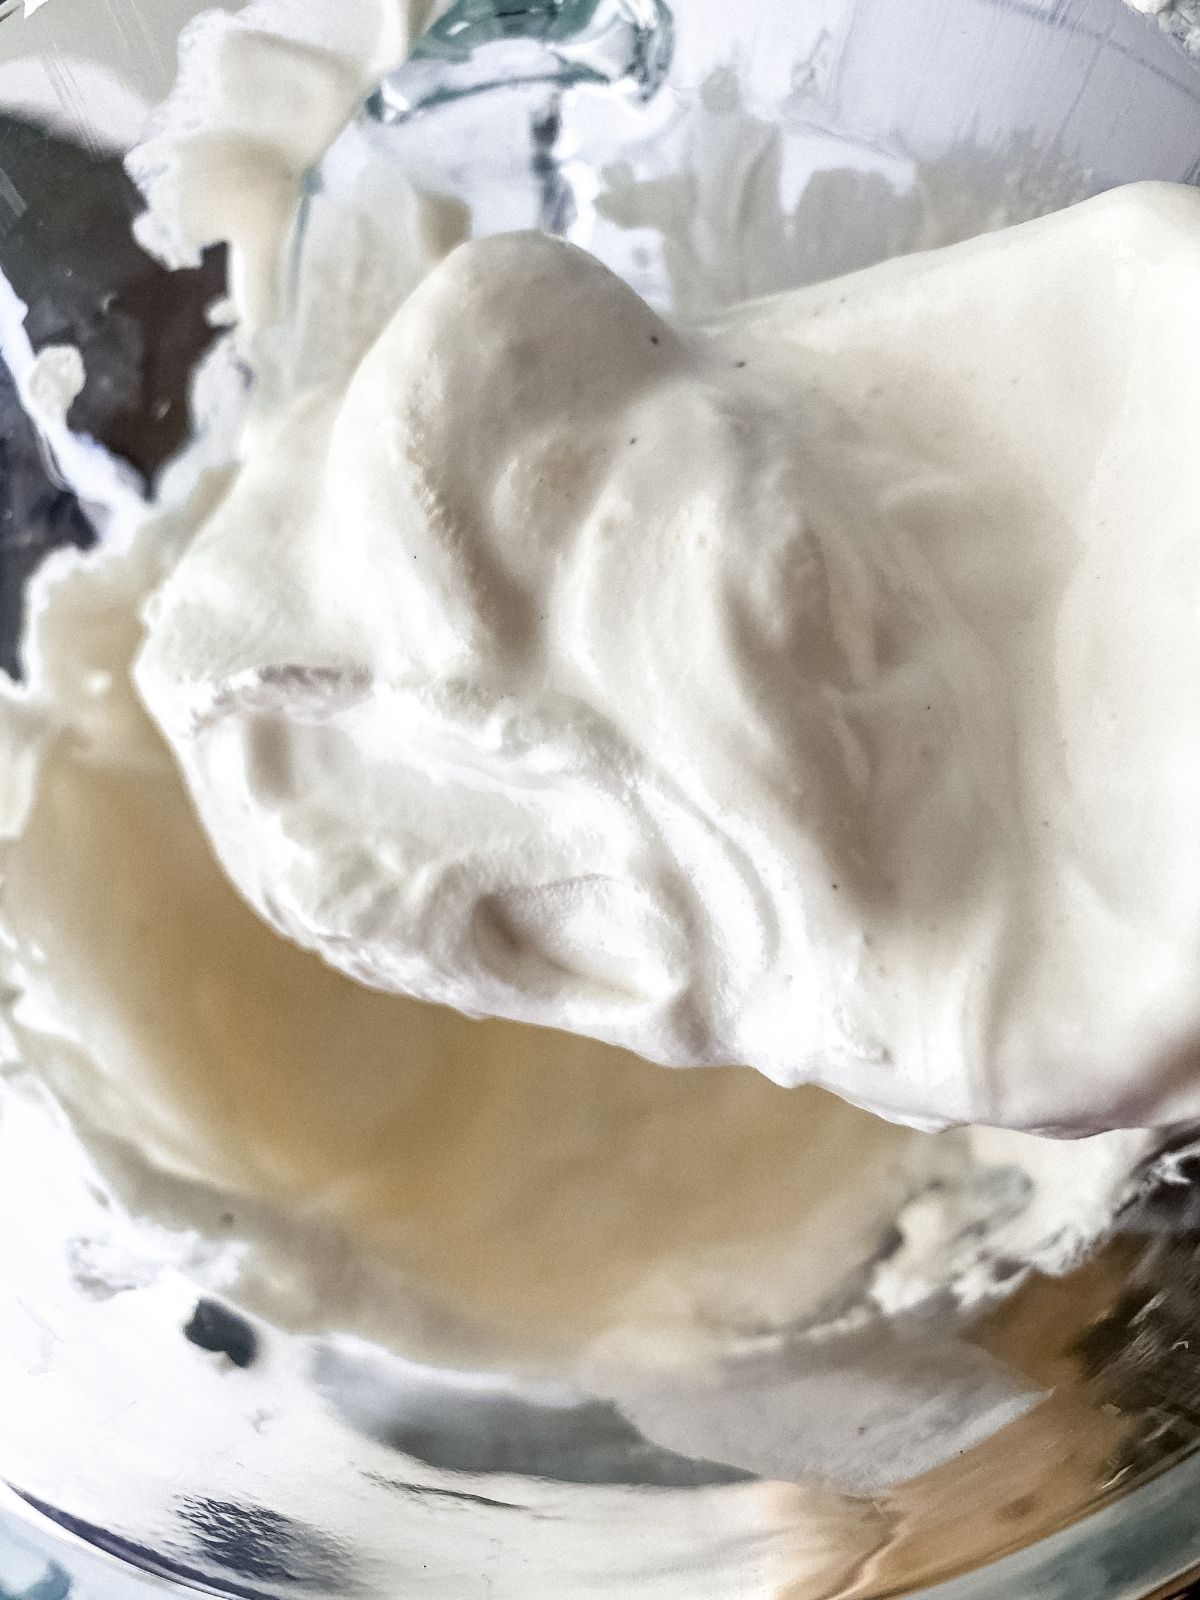 Vanilla ice cream and whipped topping blended together to form the perfect mcflurry texture.